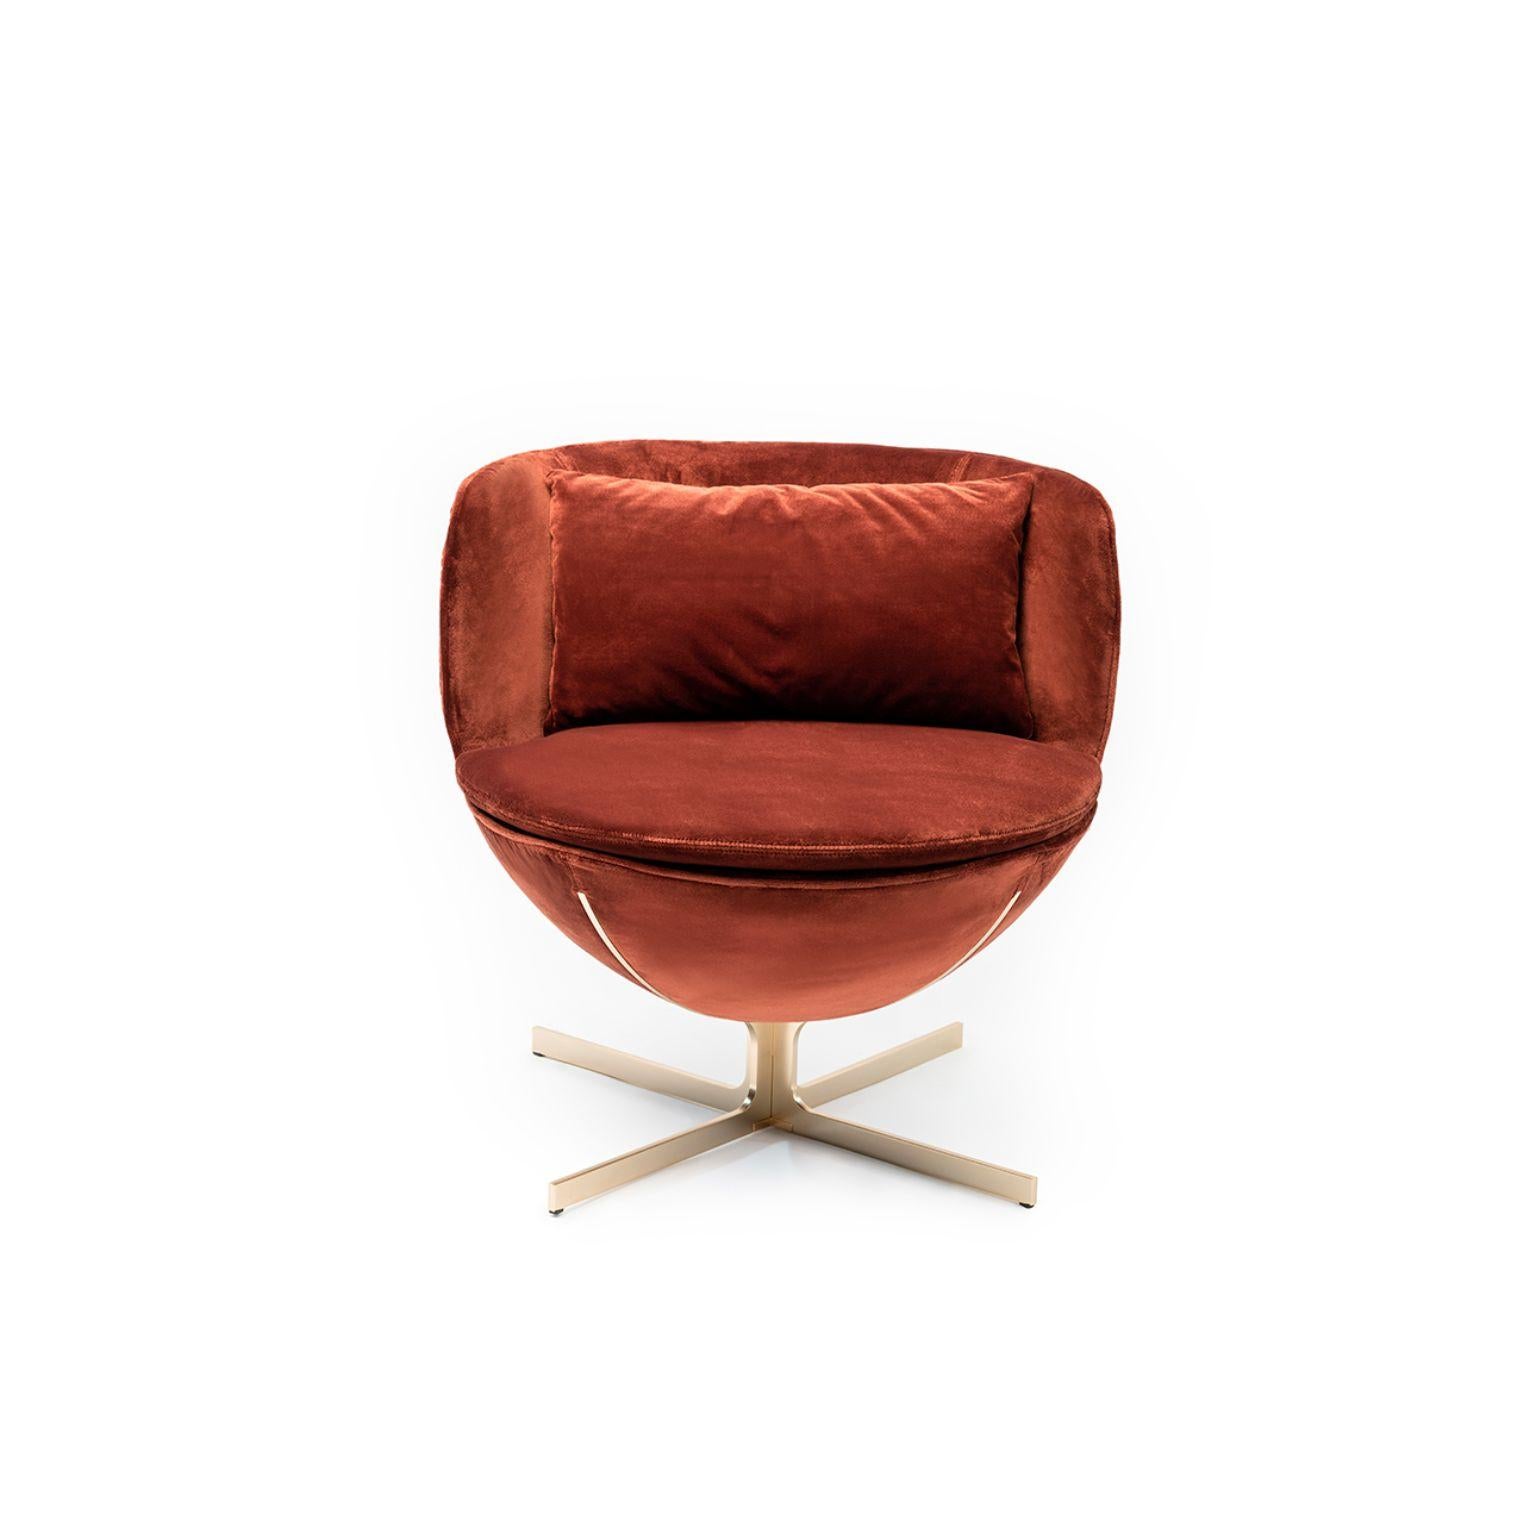 Calice armchair four-star base by Patrick Norguet.
Materials: Upholstery: Fabric also avaible in leather
 Structure: Black powder-coated metal or Matte champagne and Black chrome 
Dimensions: W 72.8 x D70.7 x H 71.6 cm
 HS 43.7 cm

The Calice